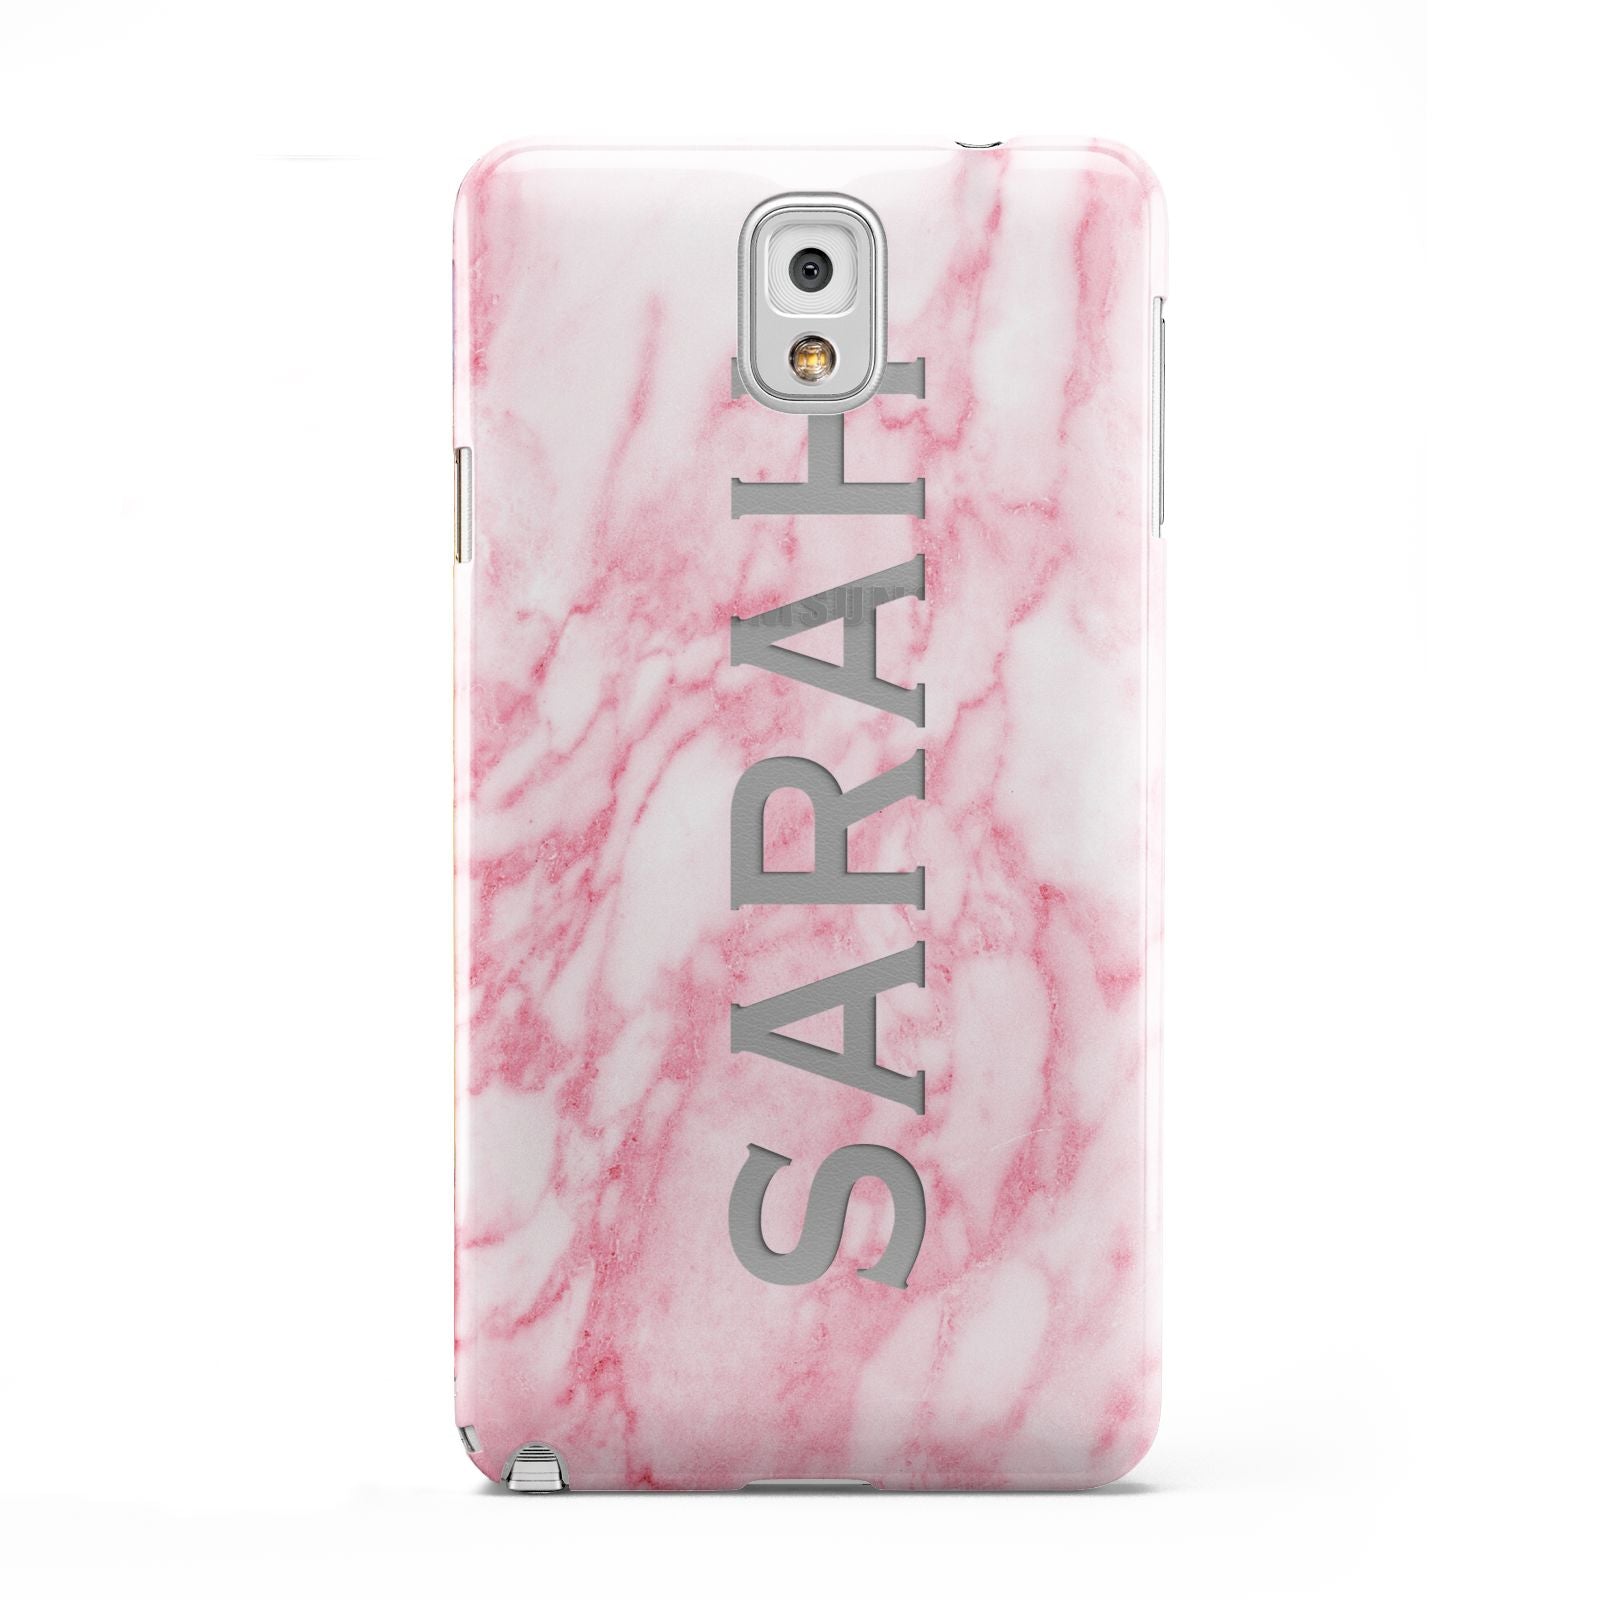 Personalised Clear Name Cutout Pink Marble Custom Samsung Galaxy Note 3 Case